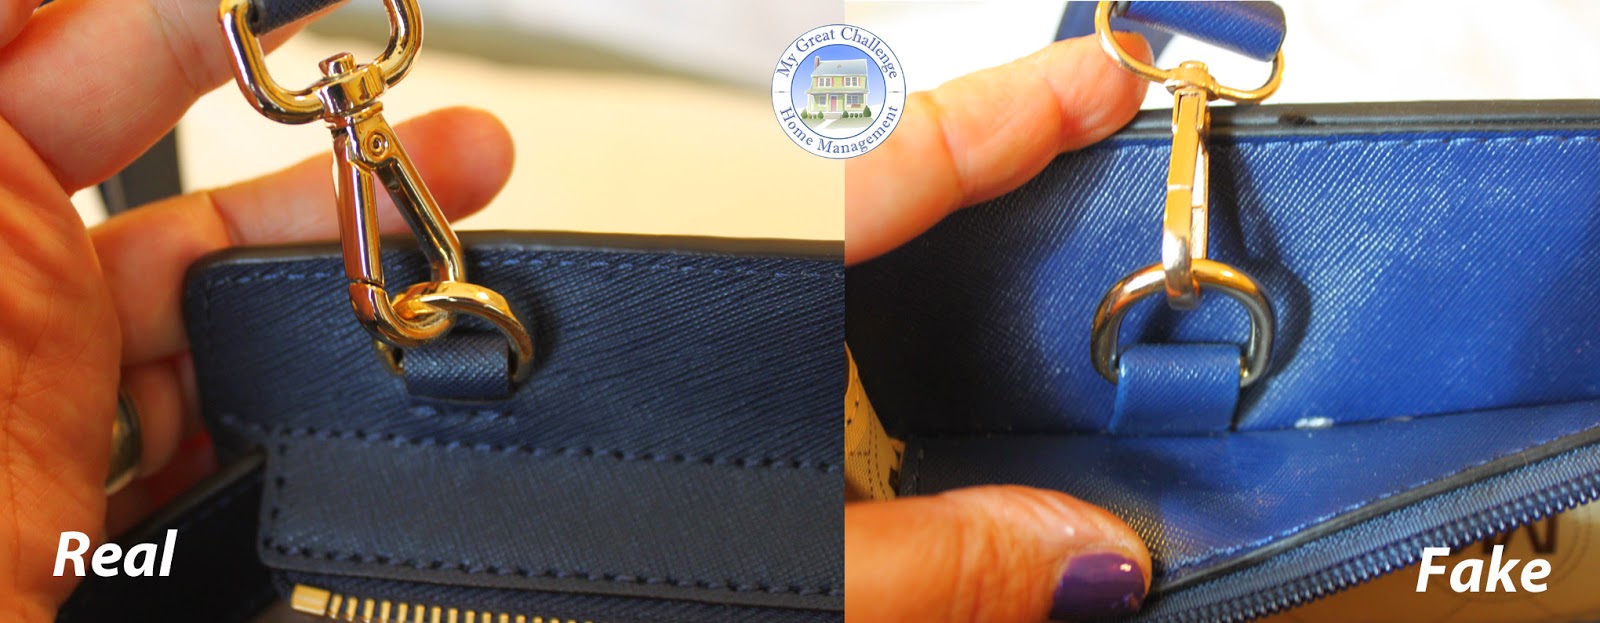 How do you tell if a handbag is authentic?